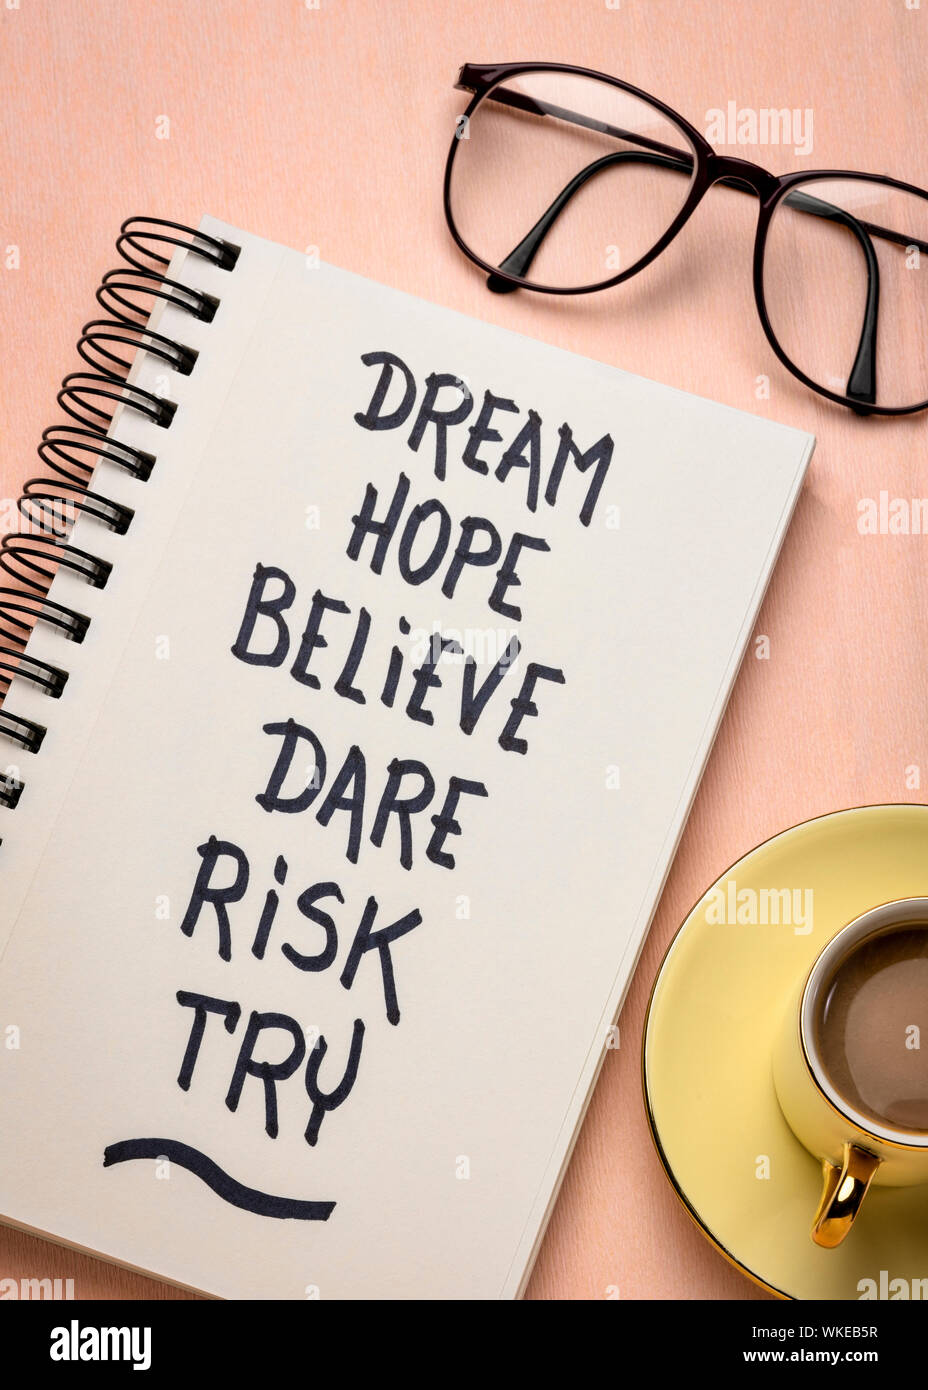 dream, hope, believe, dare, risk, try - creativity, inspirational and motivational concept, personal development,  -  handwriting in a spiral notebook Stock Photo